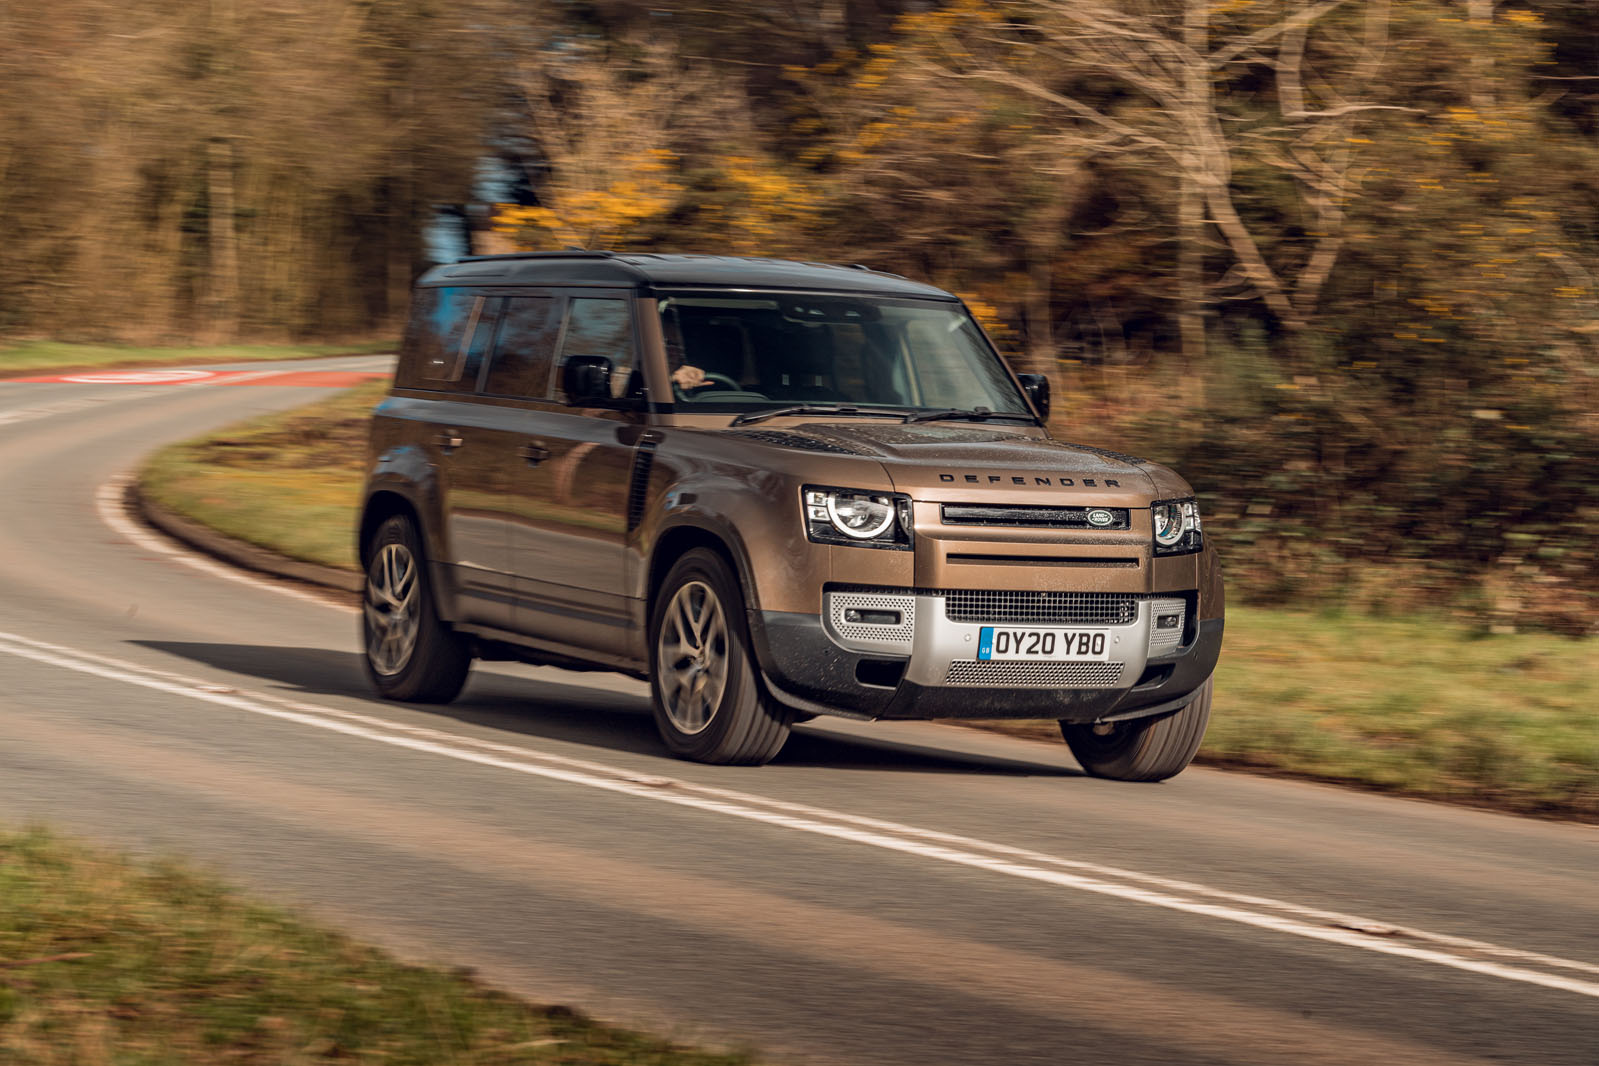 Land Rover Defender 2020 road test review - on the road front